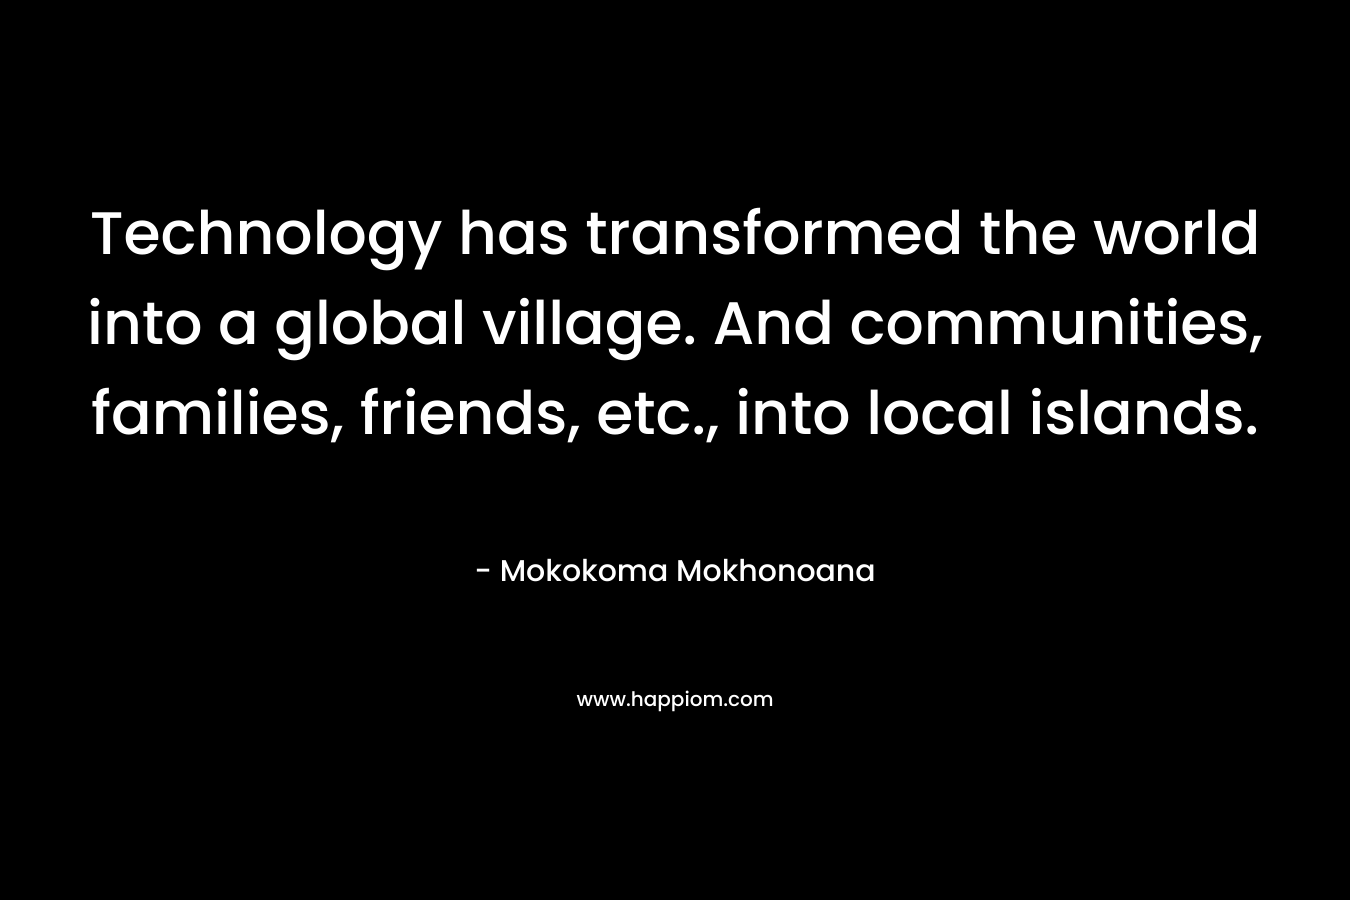 Technology has transformed the world into a global village. And communities, families, friends, etc., into local islands.